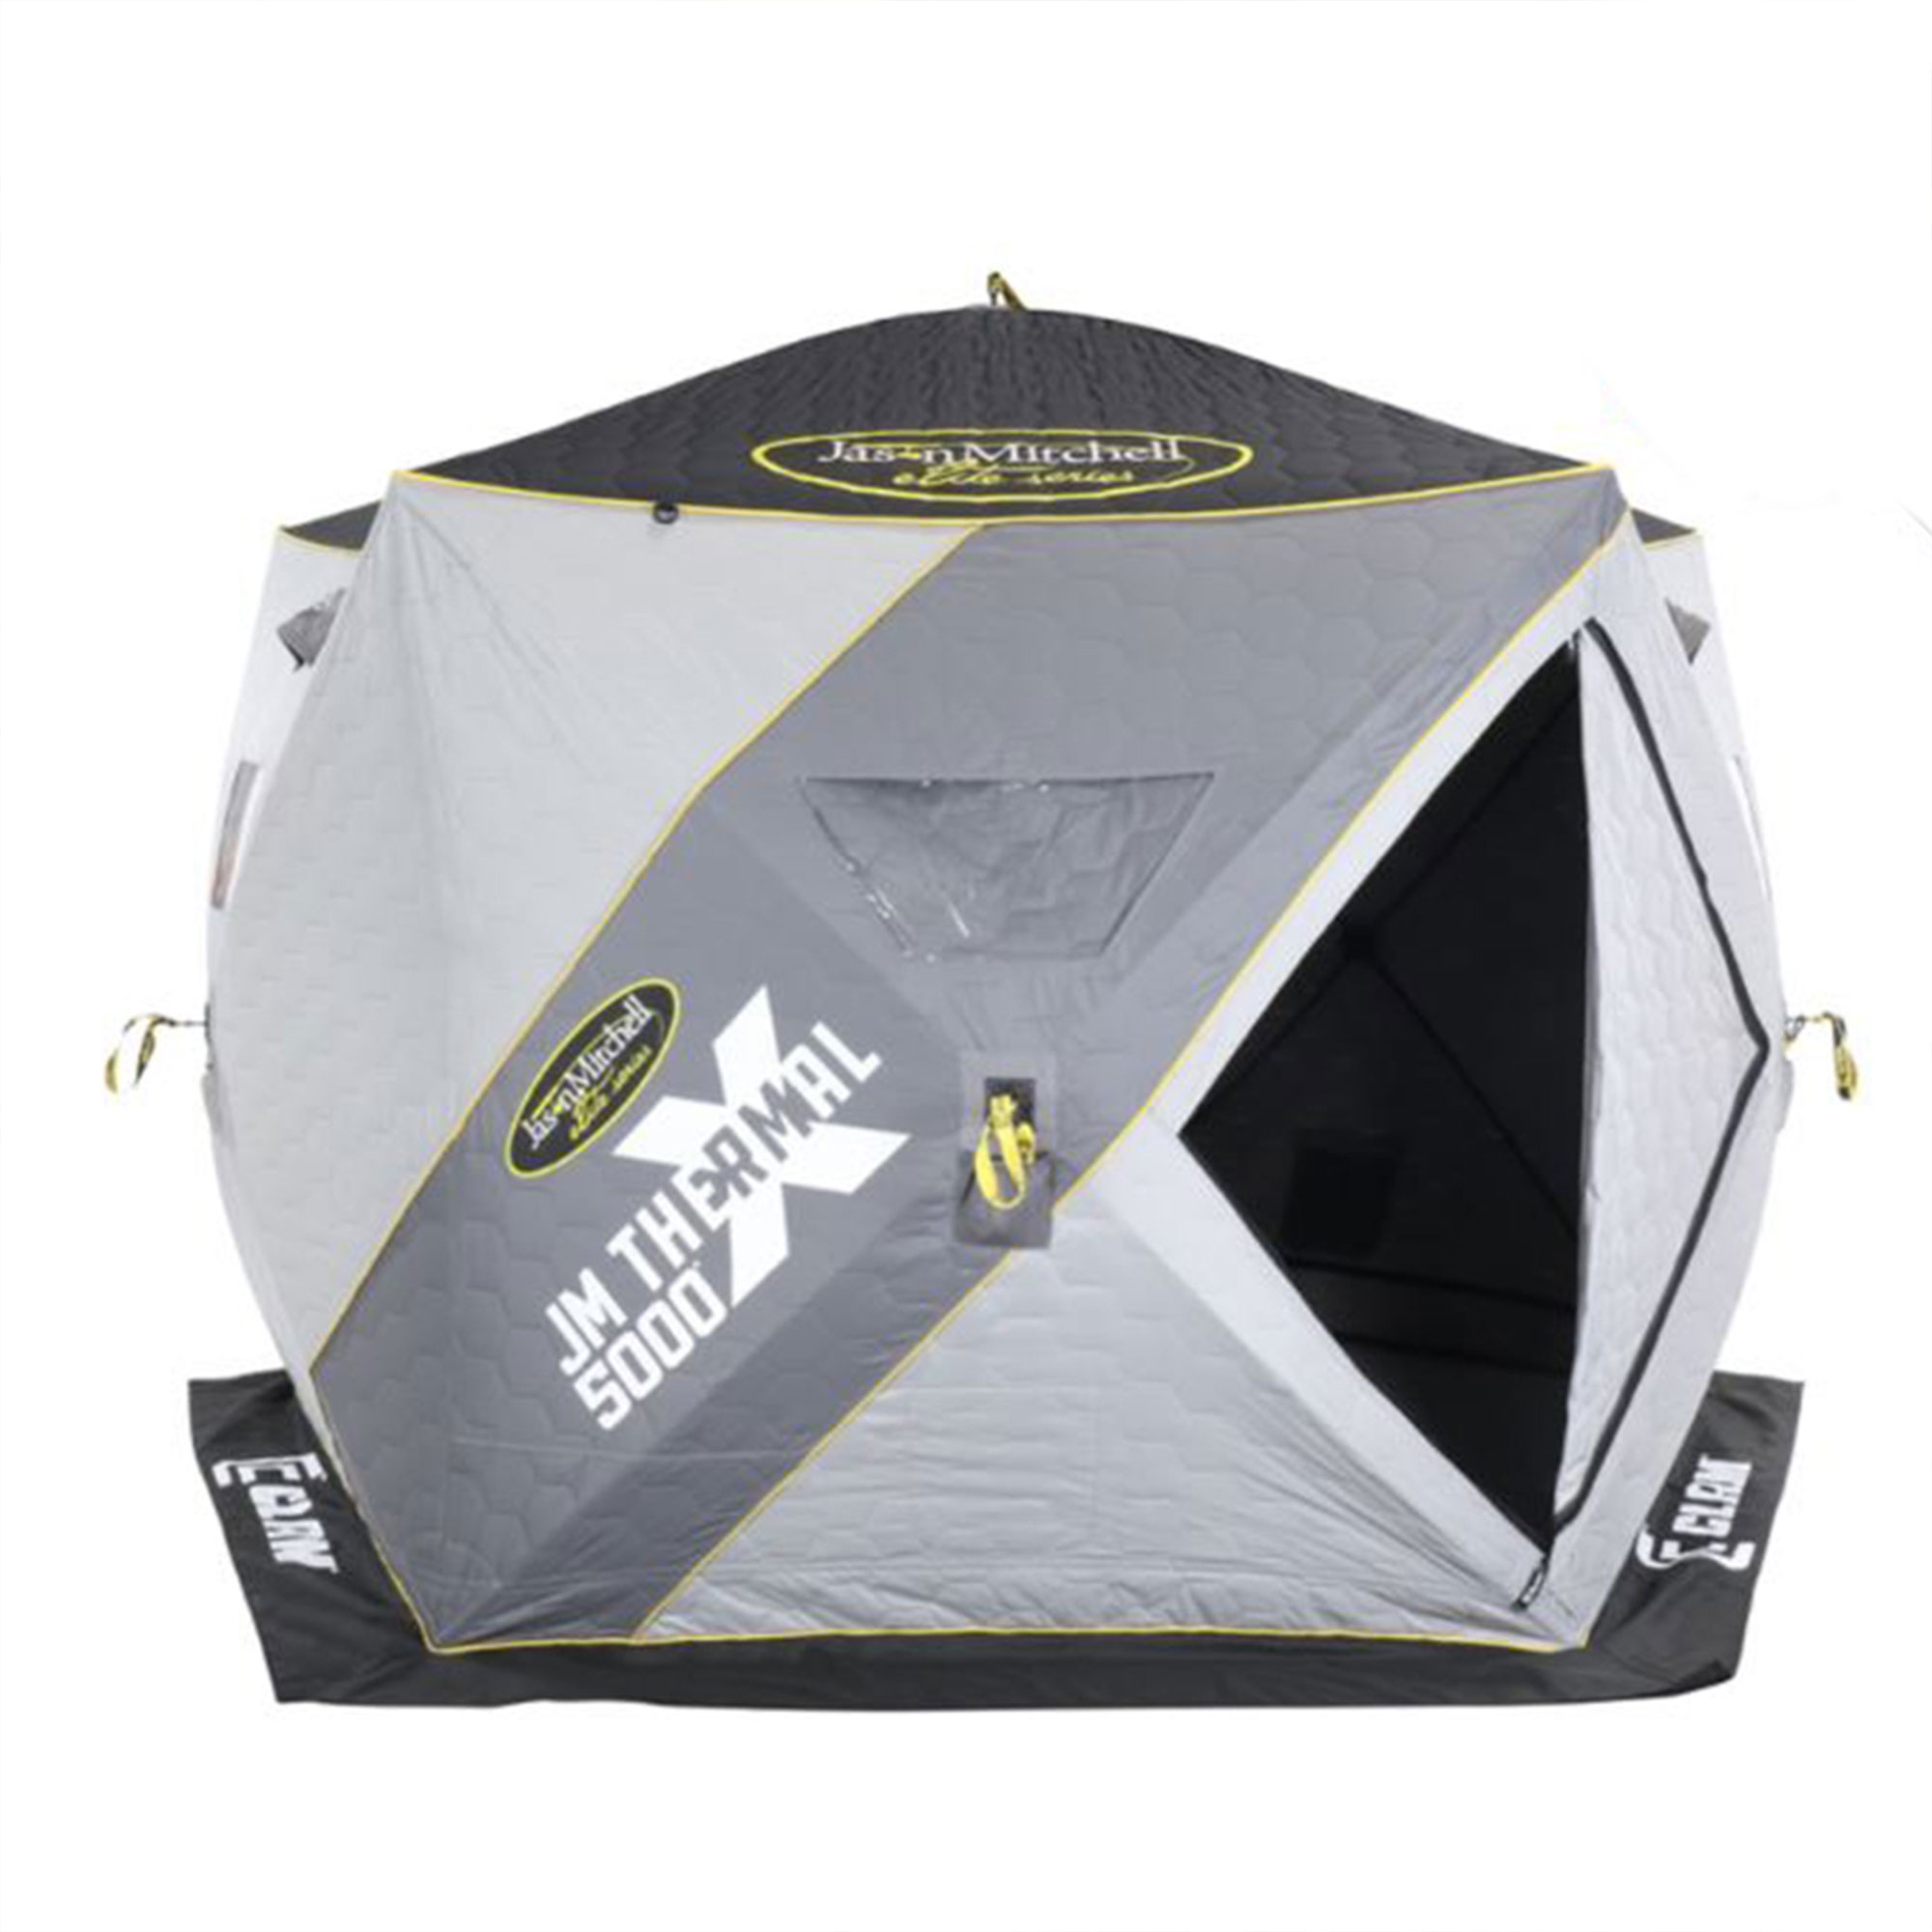 CLAM Portable 9 Foot Jason Mitchell X5000 Ice Fish Thermal Hub Shelter Tent - image 1 of 11